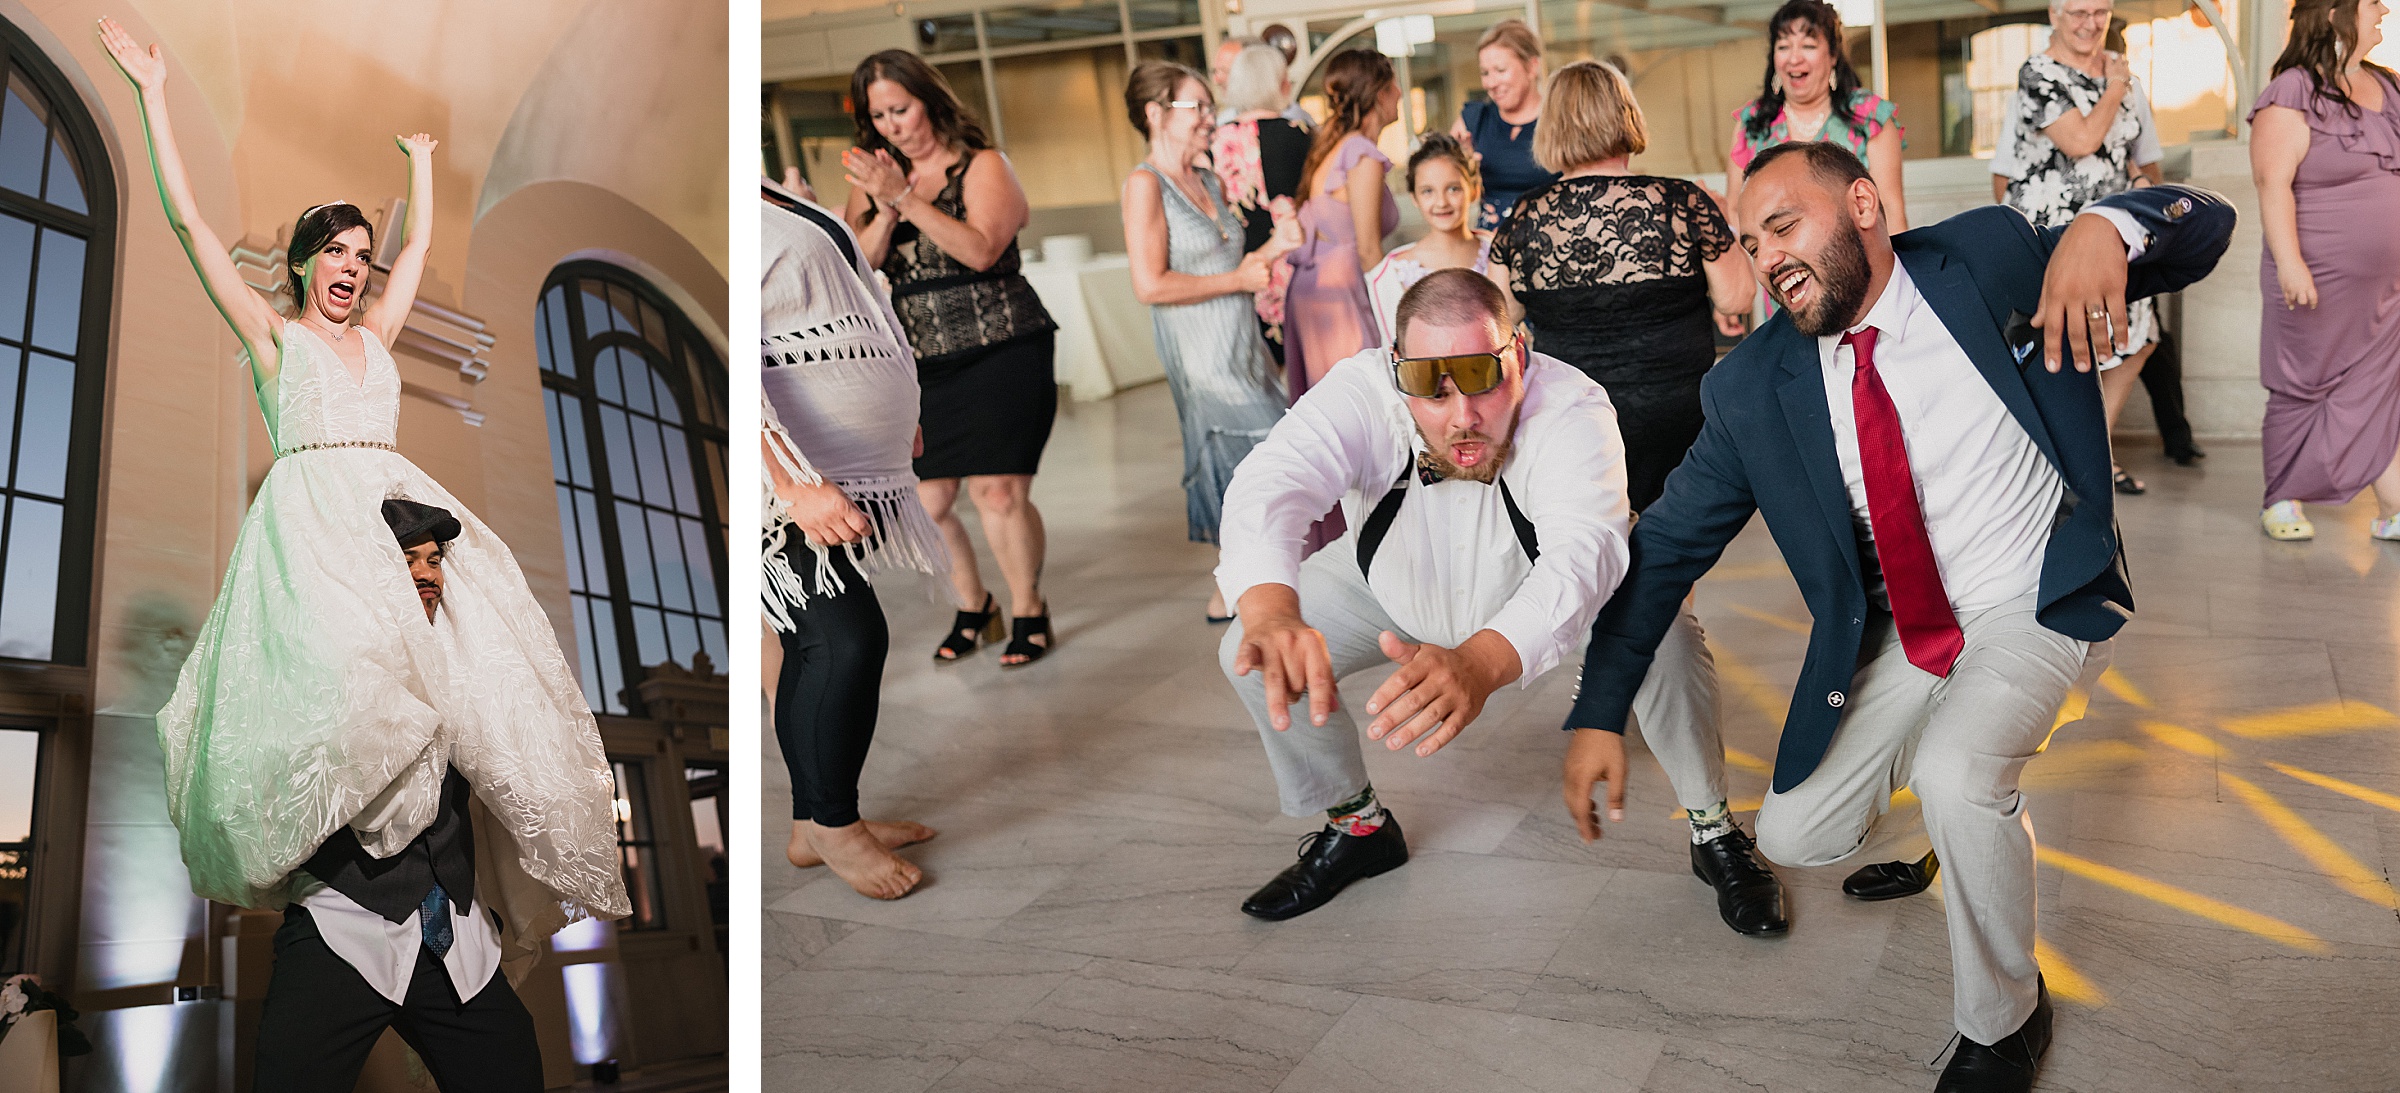 Wedding guests dance during a wedding at the Union Station in Joliet, Illinois